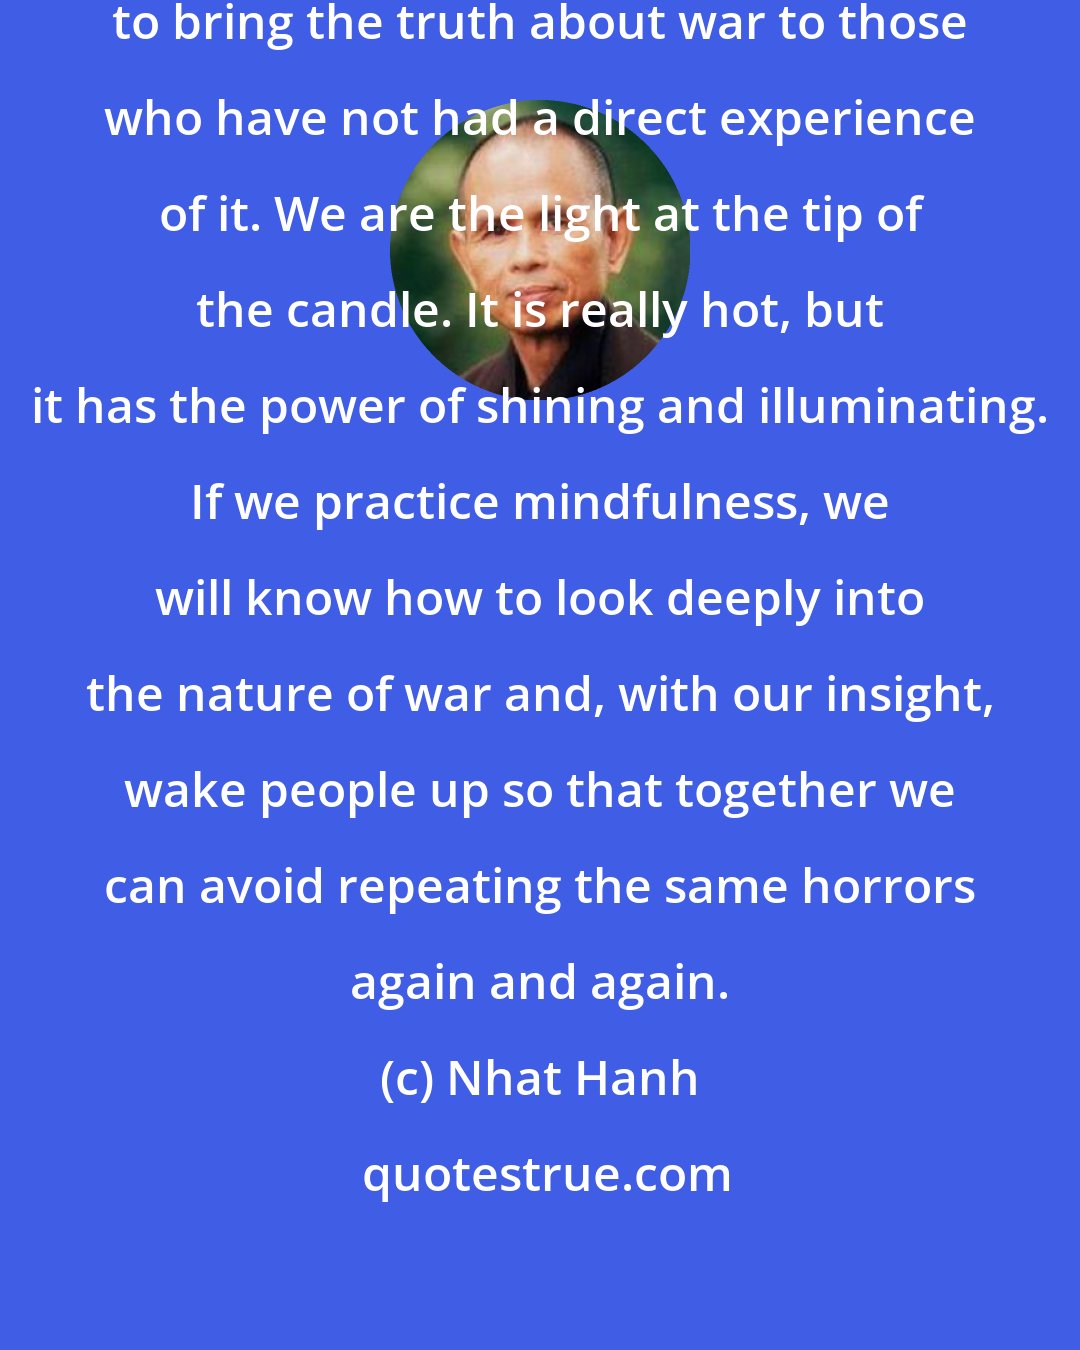 Nhat Hanh: We who have touched war have a duty to bring the truth about war to those who have not had a direct experience of it. We are the light at the tip of the candle. It is really hot, but it has the power of shining and illuminating. If we practice mindfulness, we will know how to look deeply into the nature of war and, with our insight, wake people up so that together we can avoid repeating the same horrors again and again.